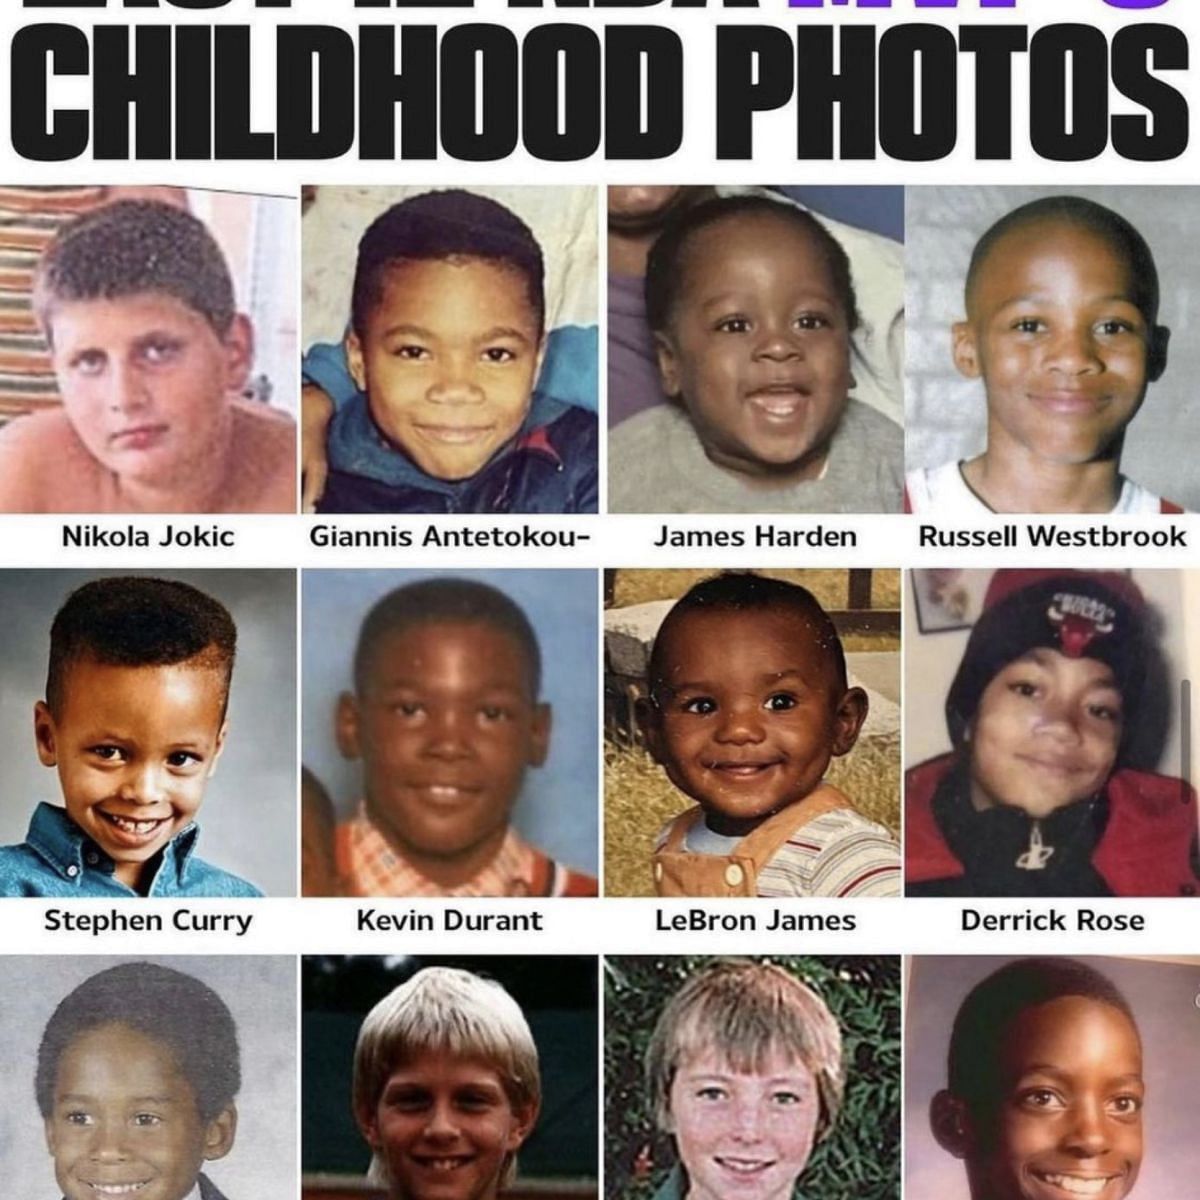 Photos: Top 10 Childhood Pictures Of Nba Superstars Feat. Lebron James, Steph  Curry, Michael Jordan, And More